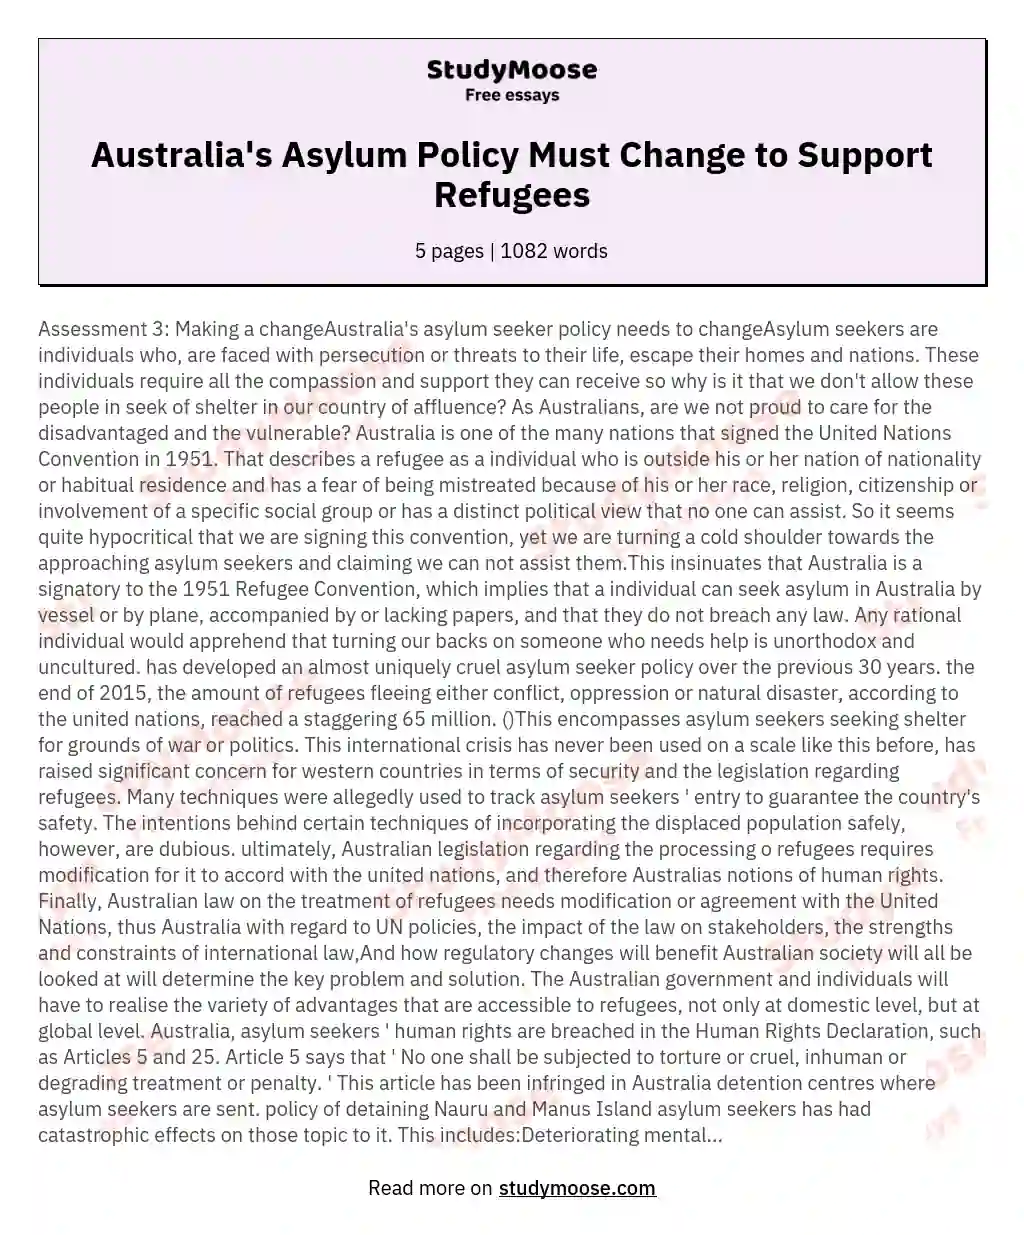 Australia's Asylum Policy Must Change to Support Refugees essay